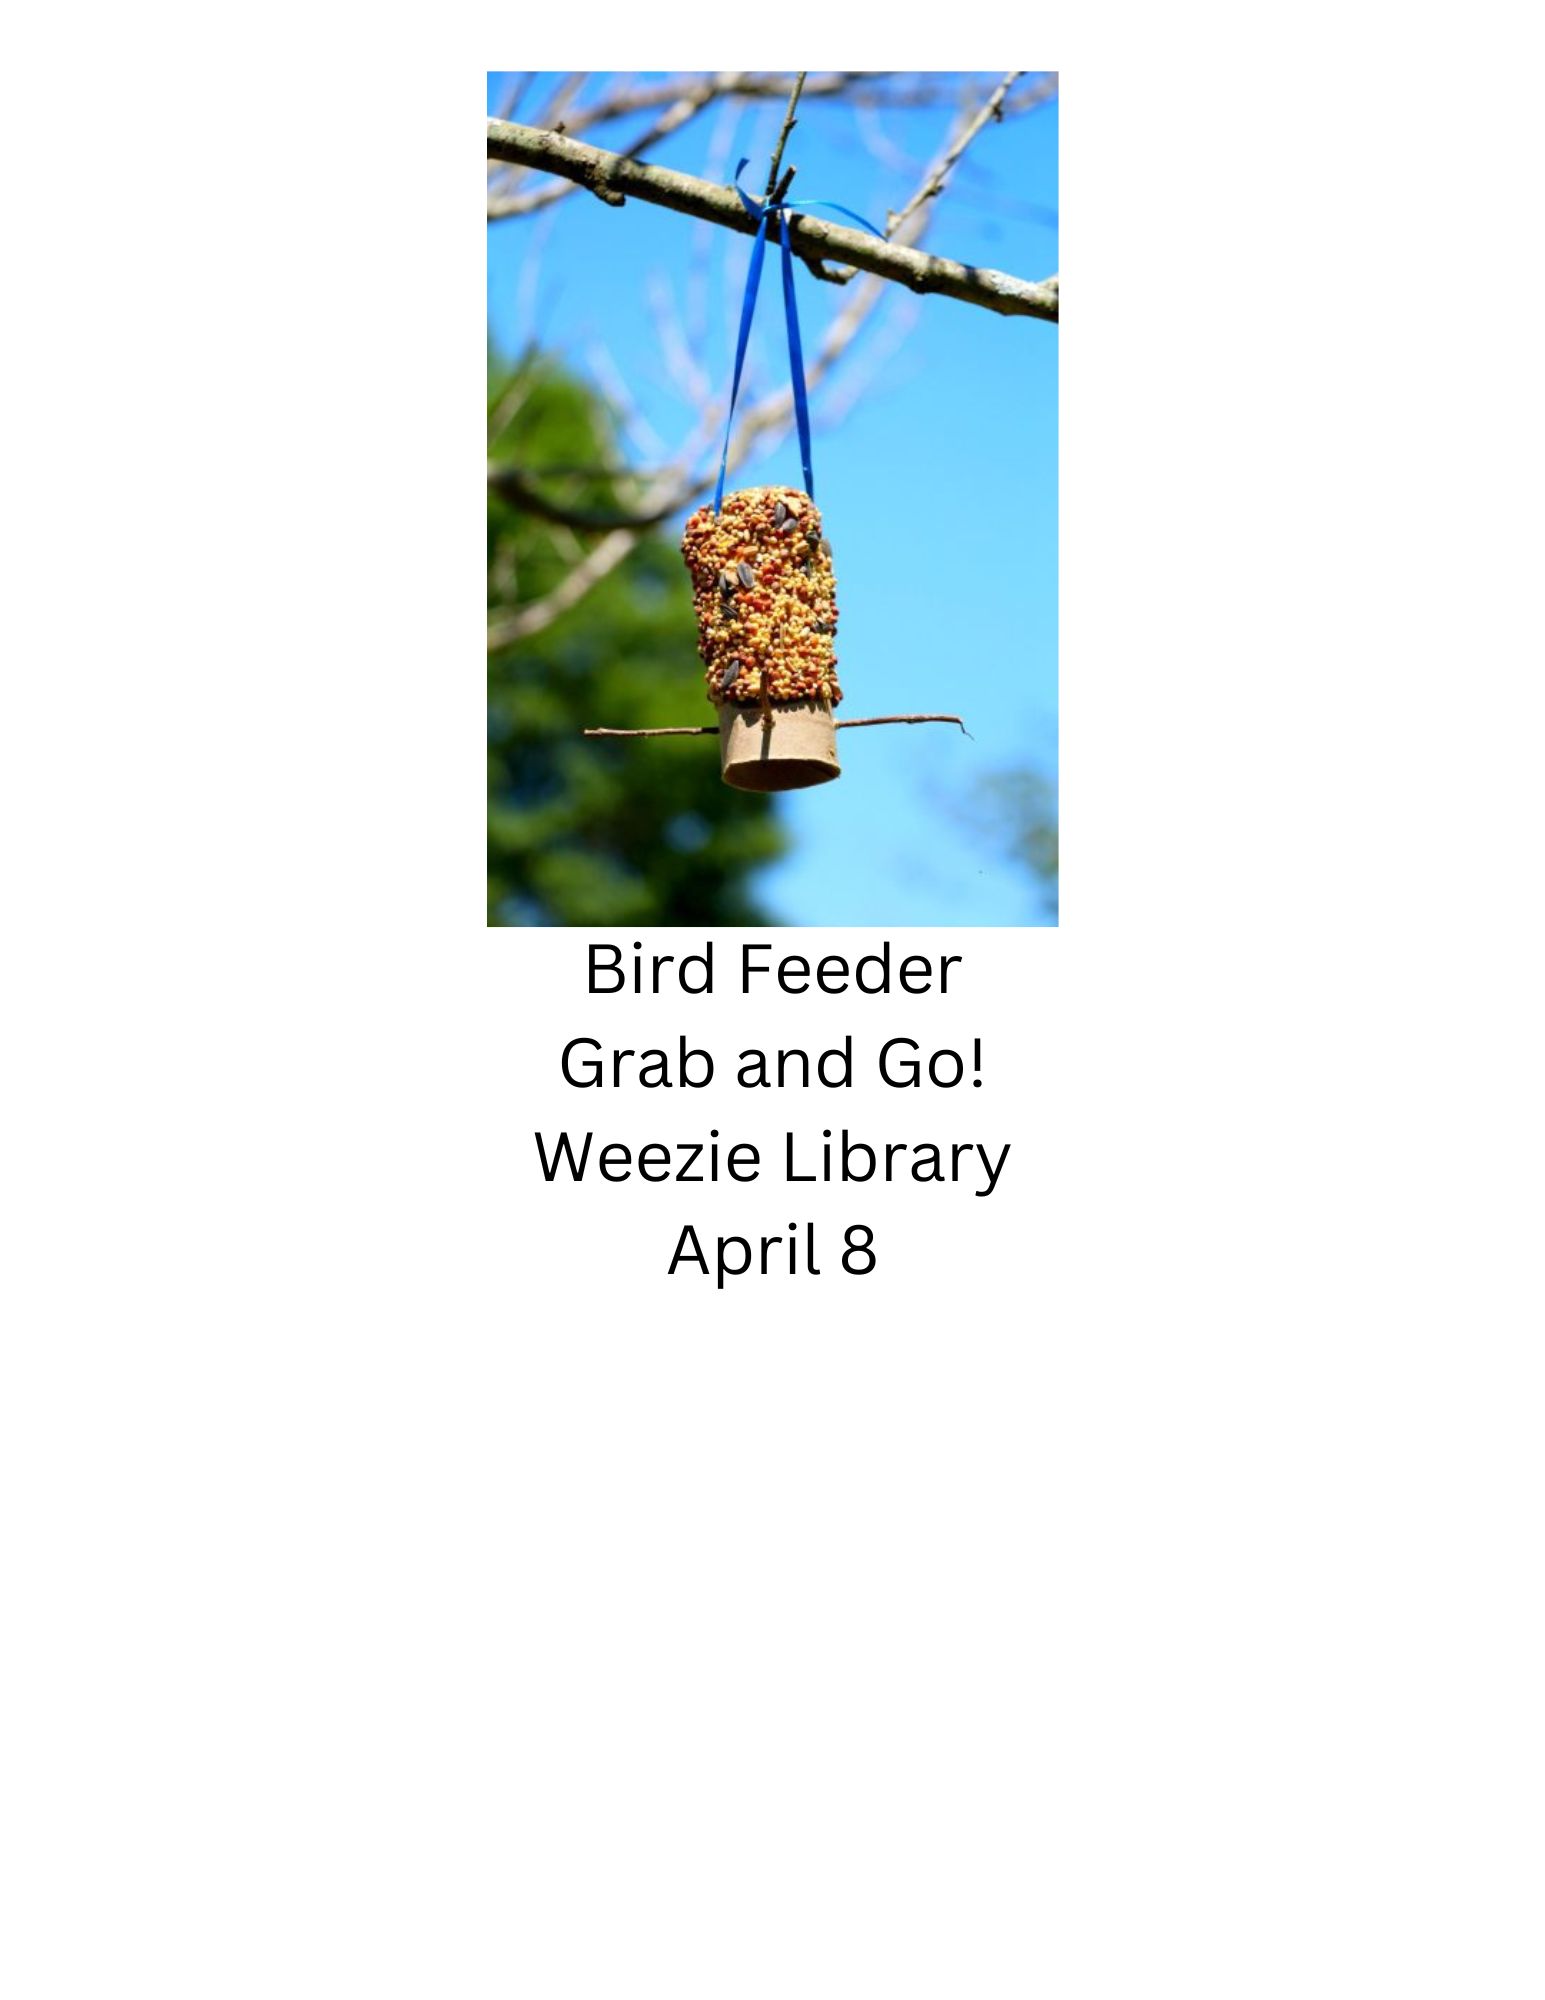 Grab and Go Bird Feeder and Perch